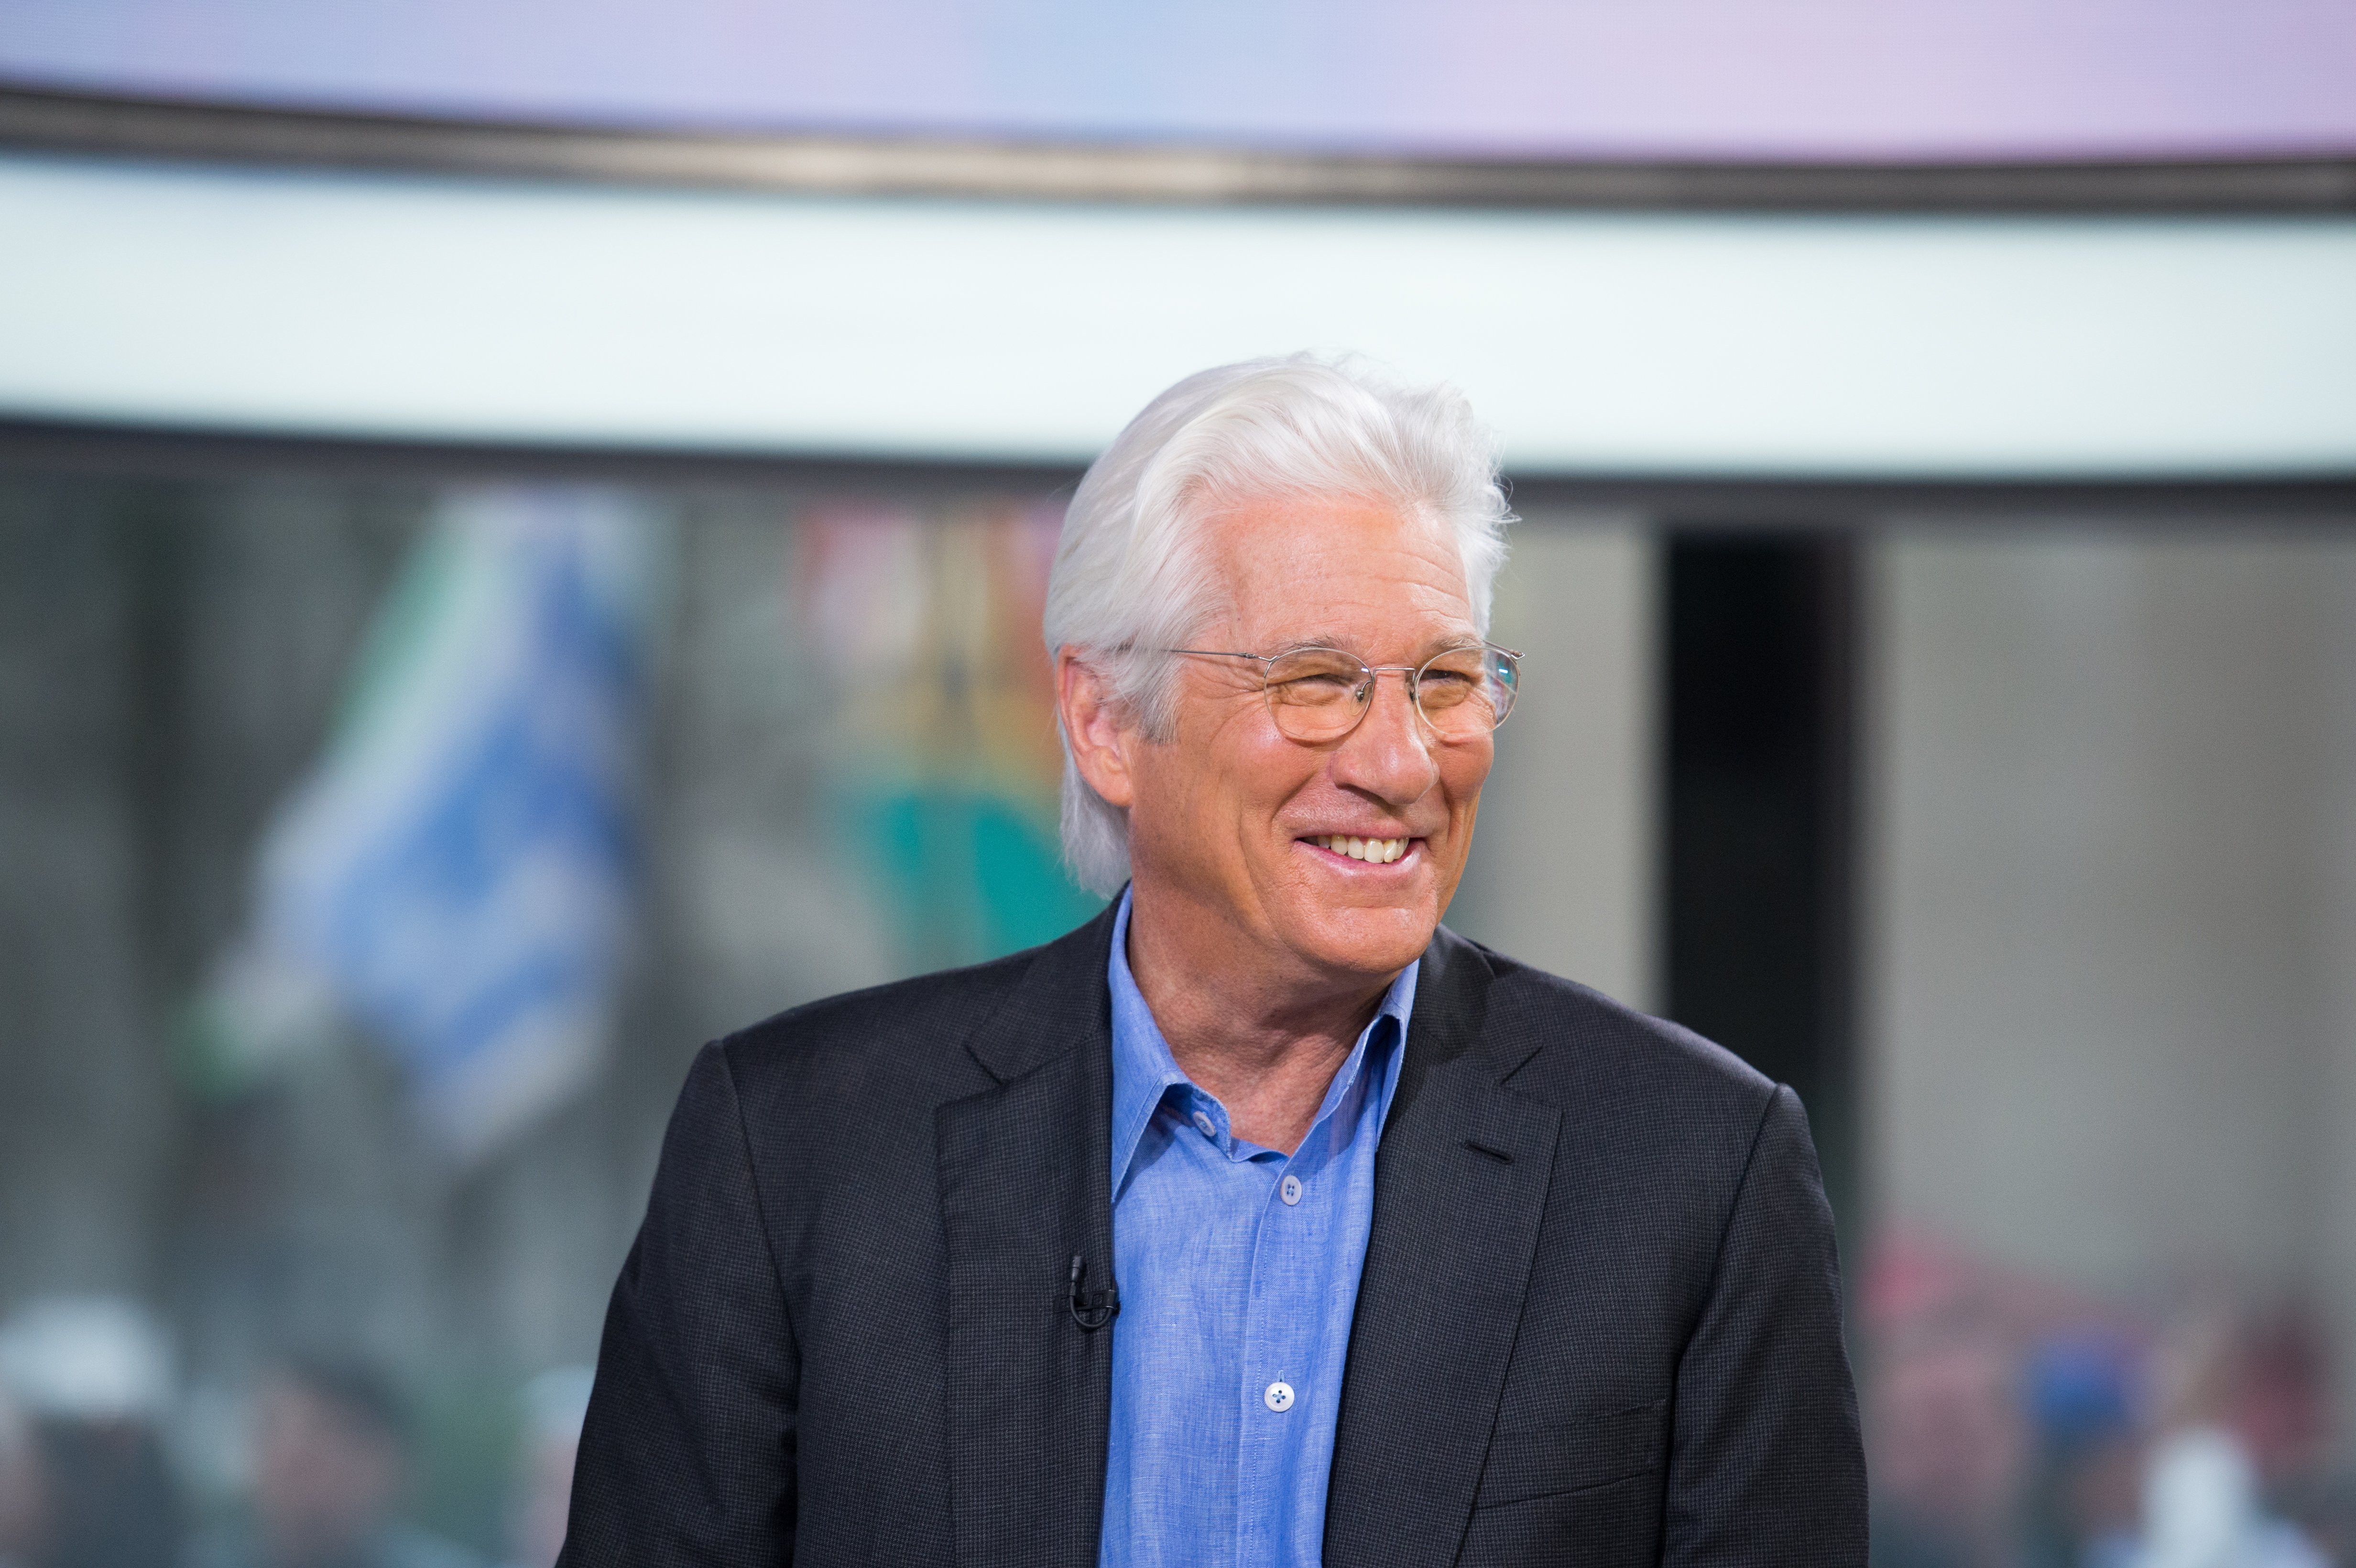 Richard Gere on the "Today" show to talk about his film "Norman: The Moderate Rise and Tragic Fall of a New York Fixer" on April 13, 2017. | Source: Getty Images